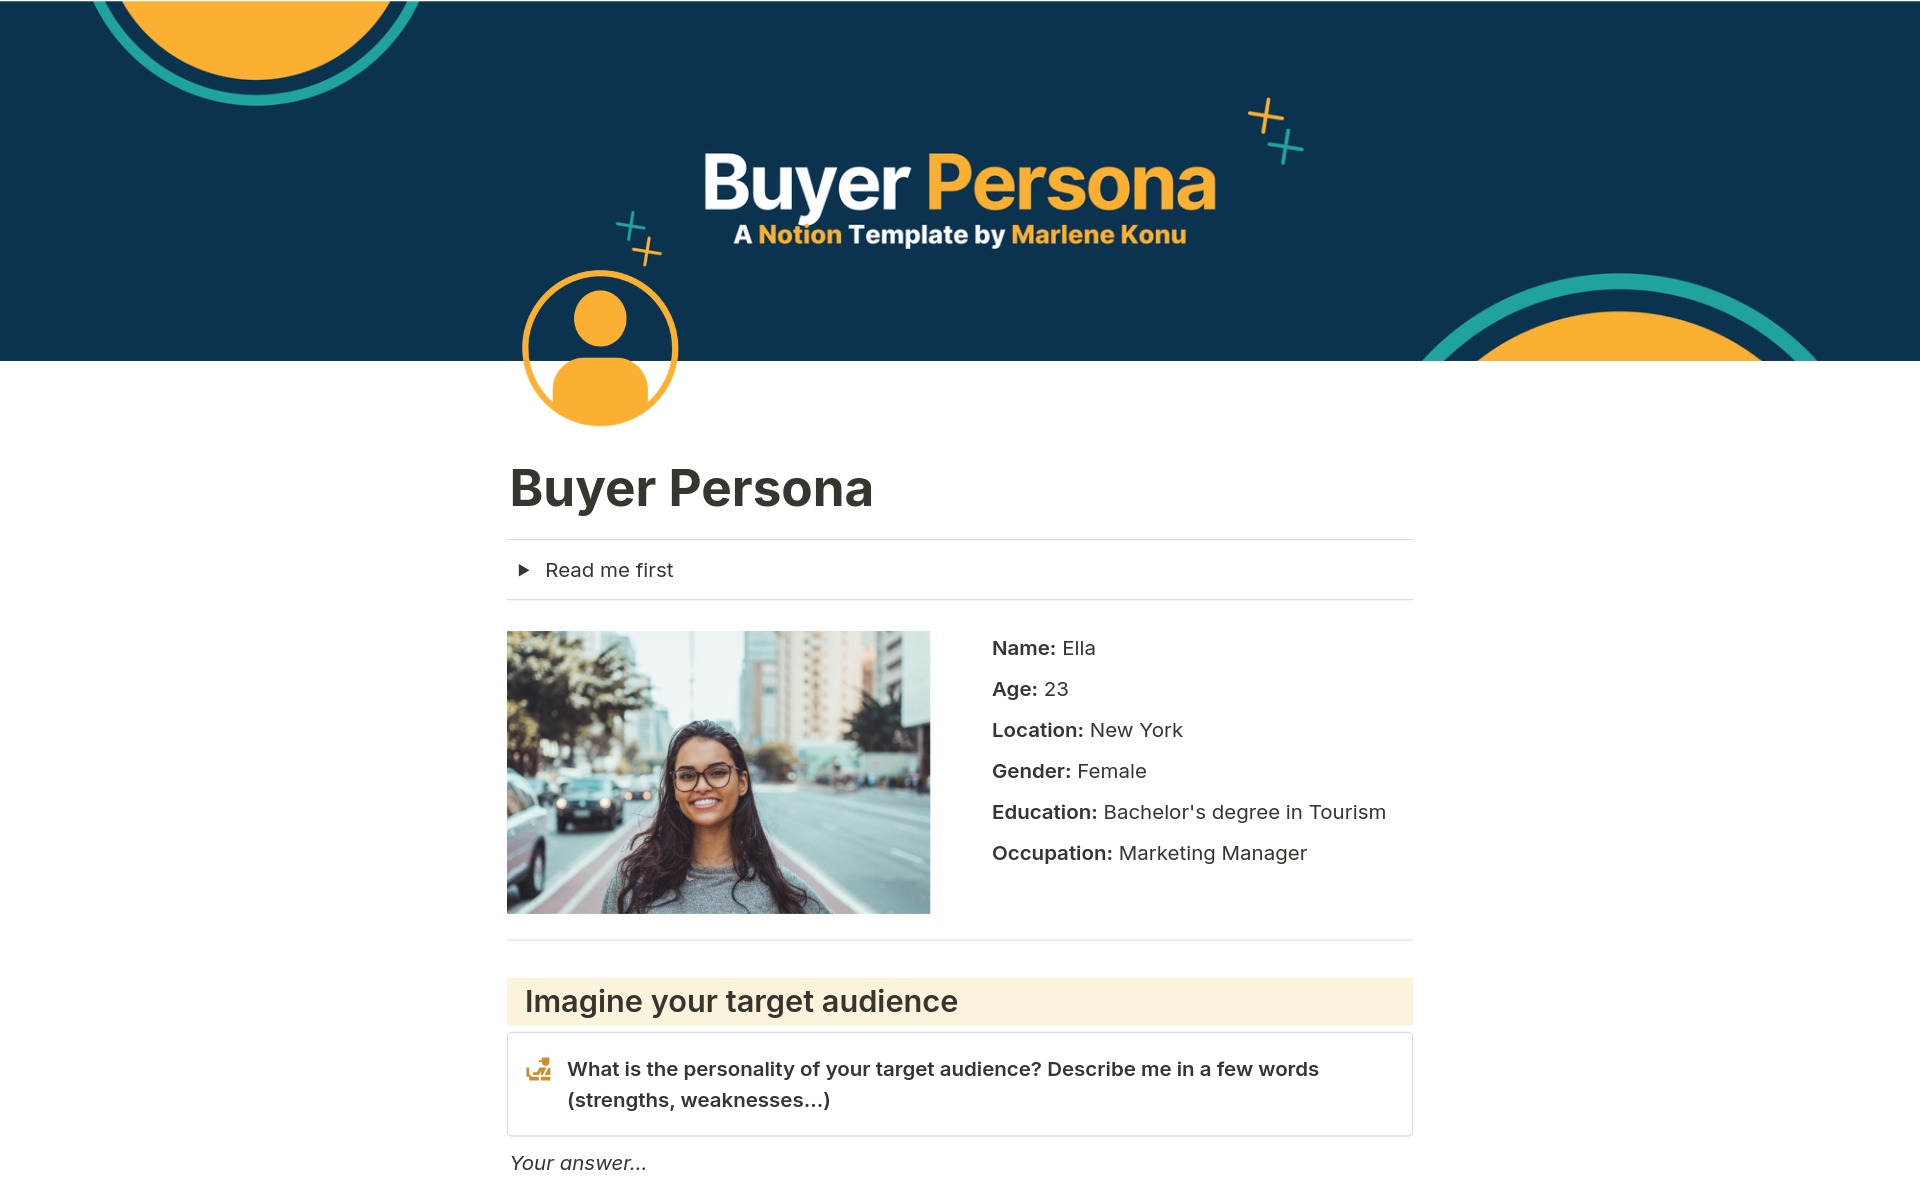 This Notion template serves as a strategic tool for businesses to establish their buyer personas, offering a step-by-step guide to outline the unique attributes of their target audience.